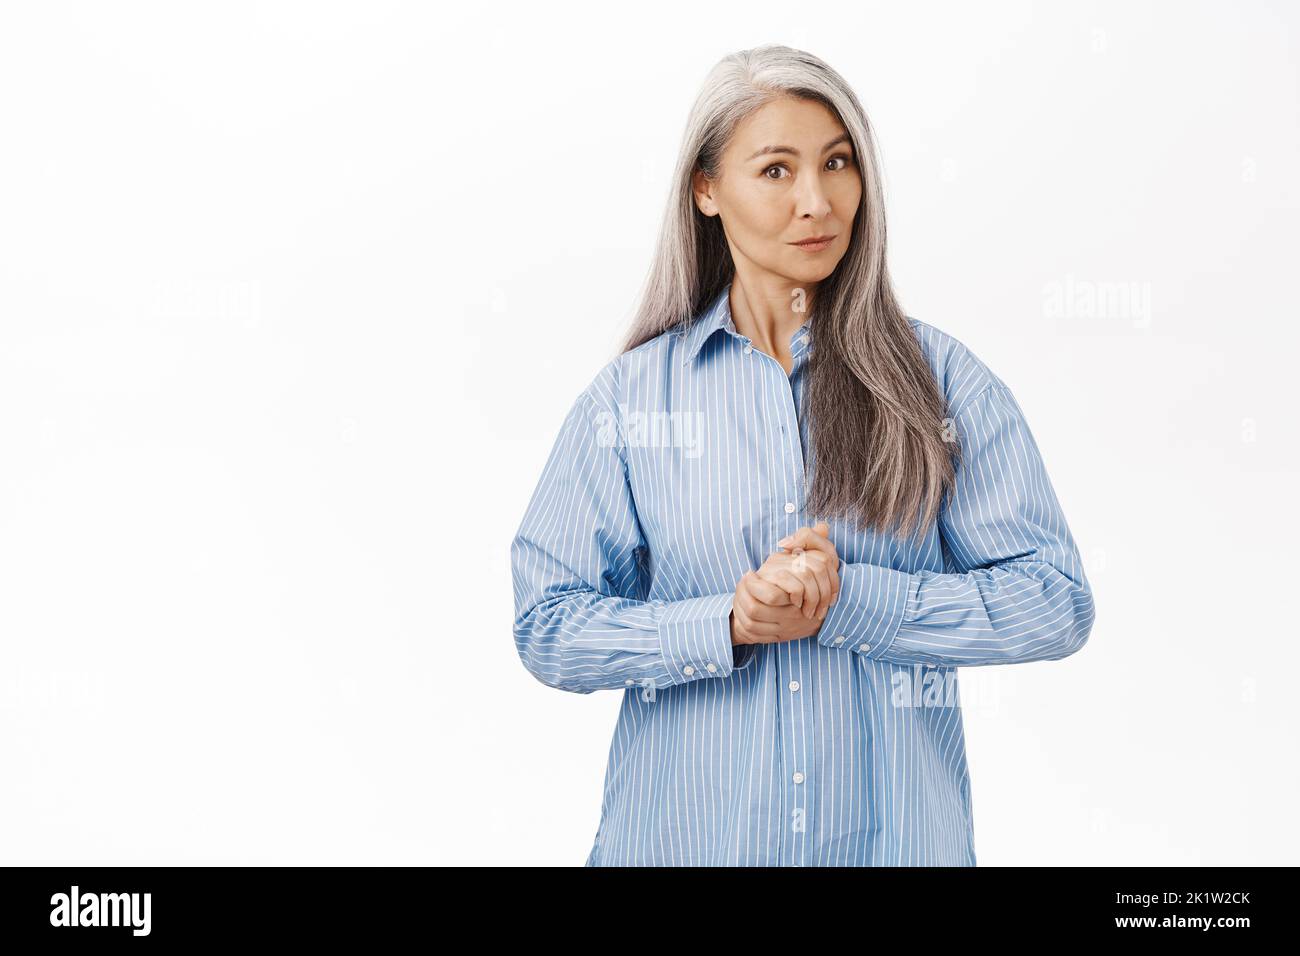 Image of japanese senior woman, beautiful middle aged lady with grey hair, assisting, ready to help, consultating, standing over white background. Stock Photo